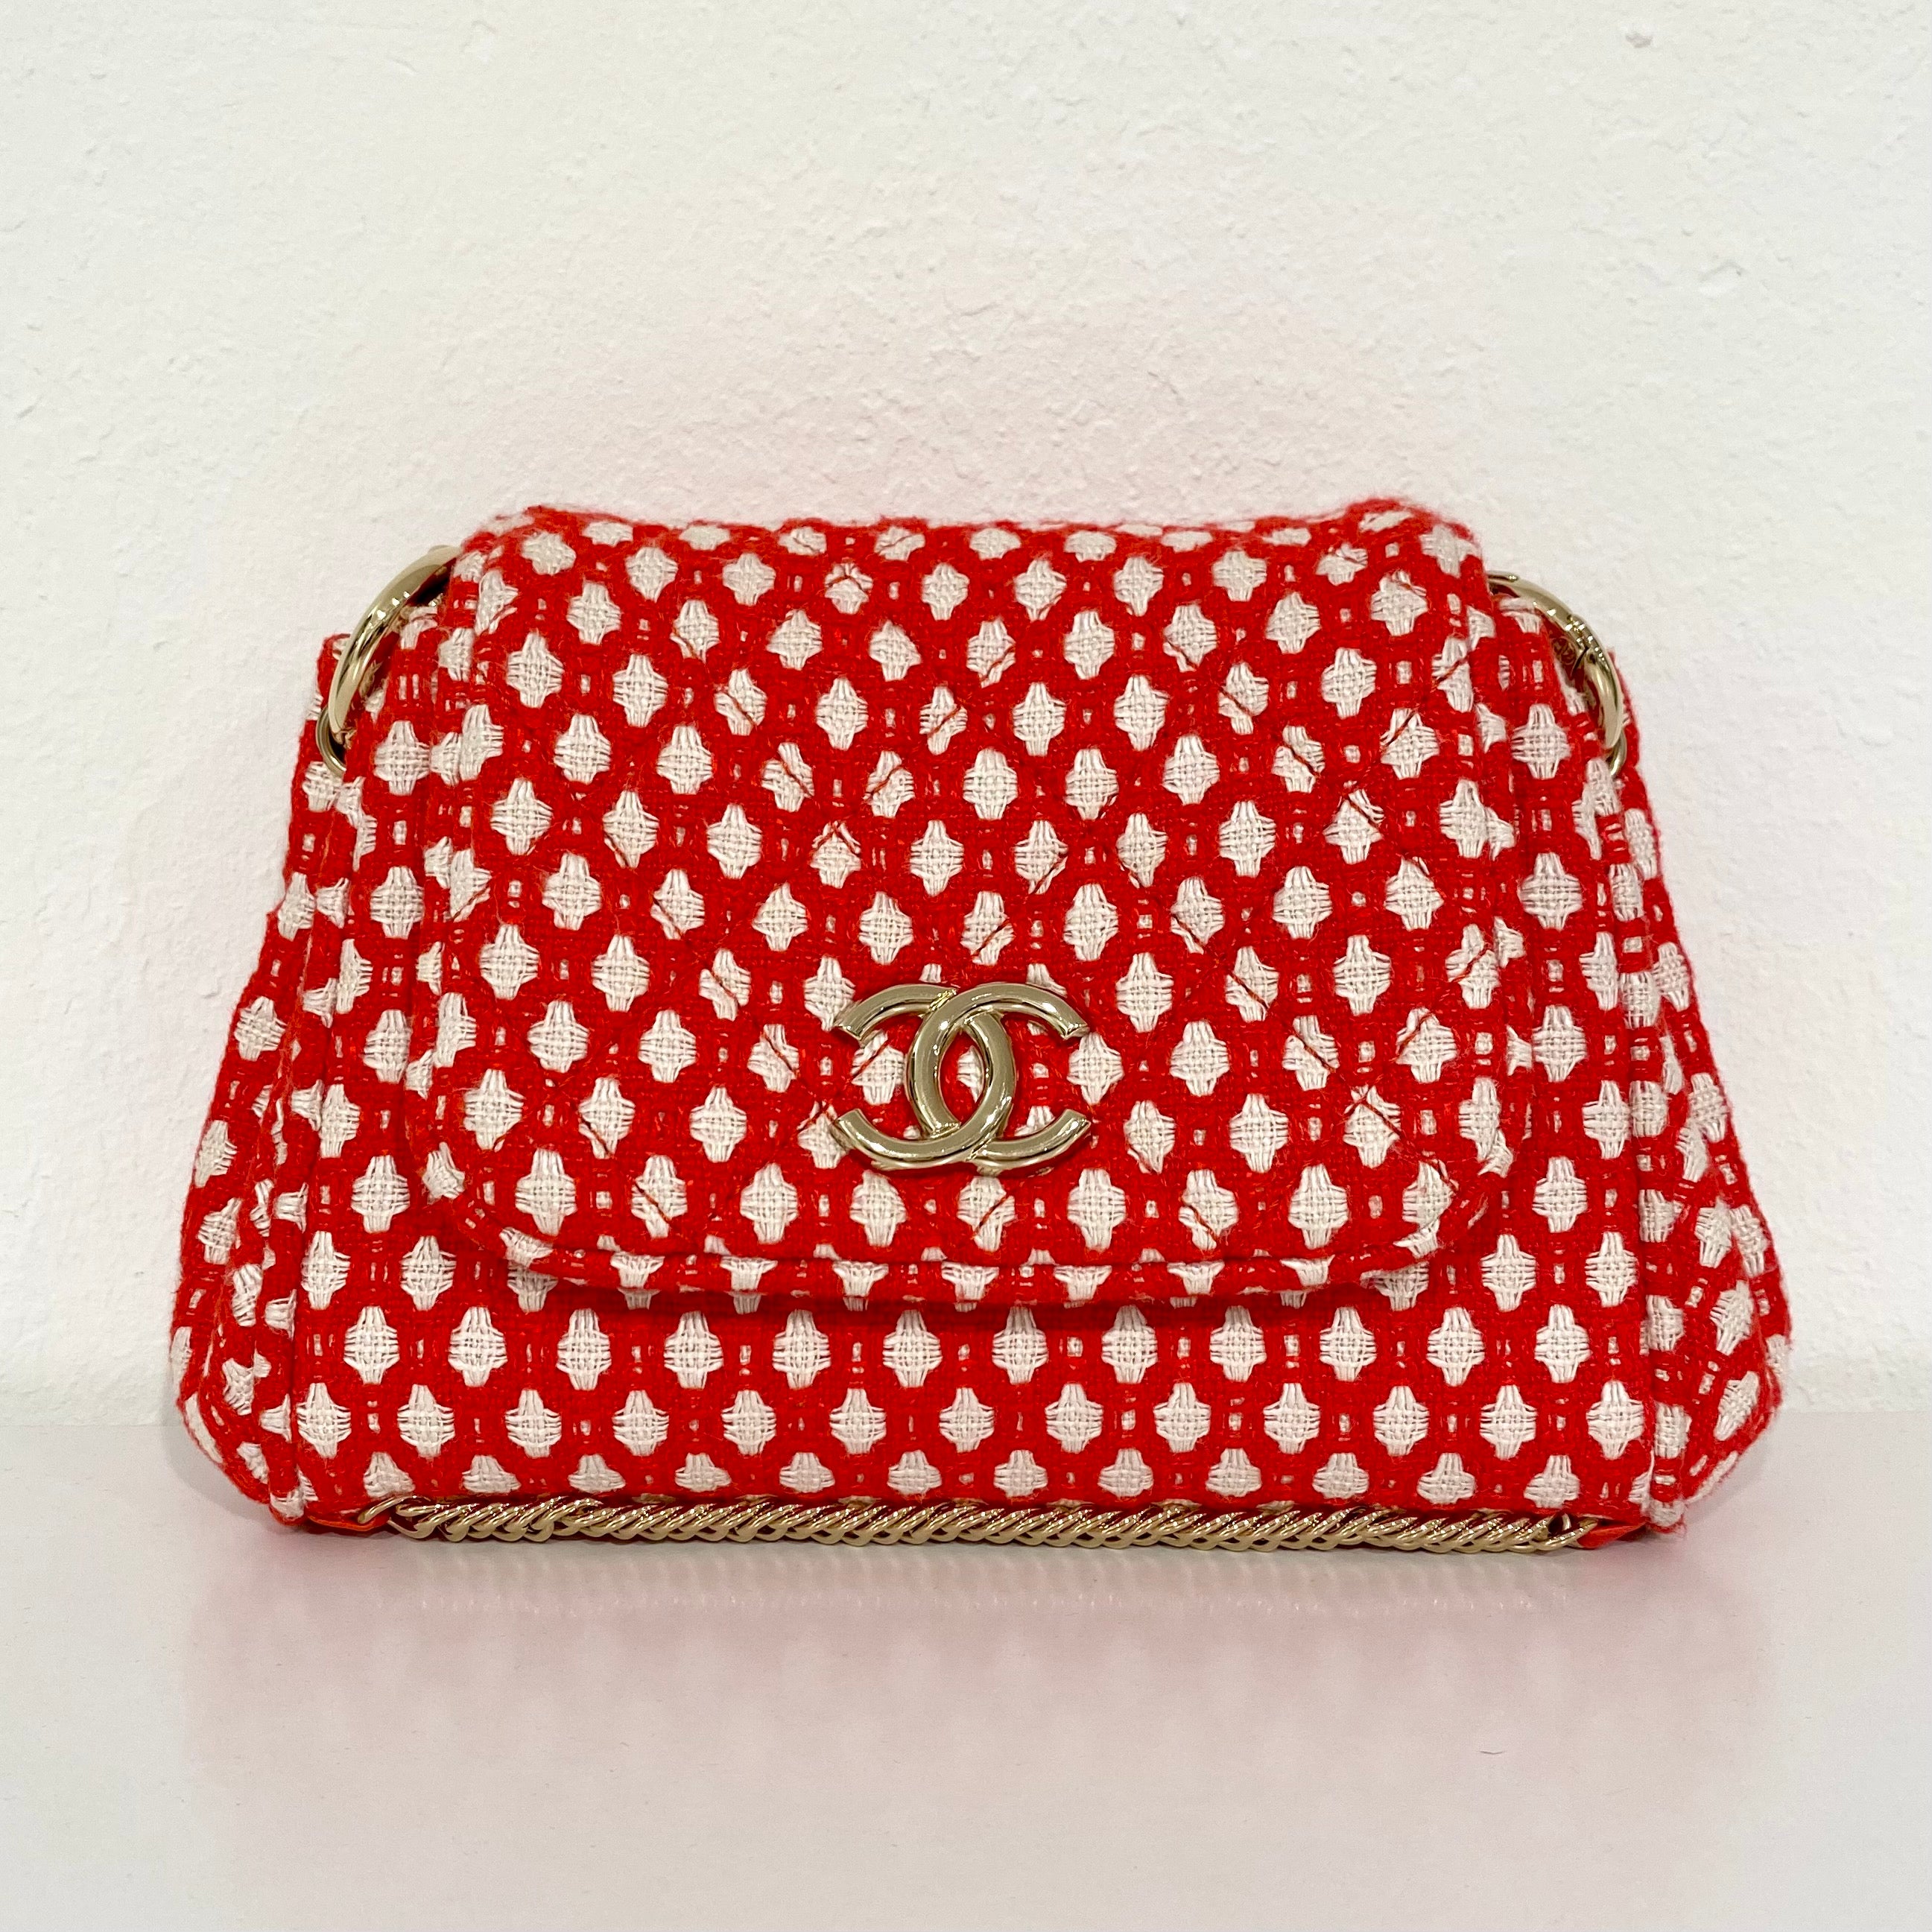 Chanel Red, White and Blue Tweed Small CC Filigree Bag Gold Hardware, 2020 (Like New)